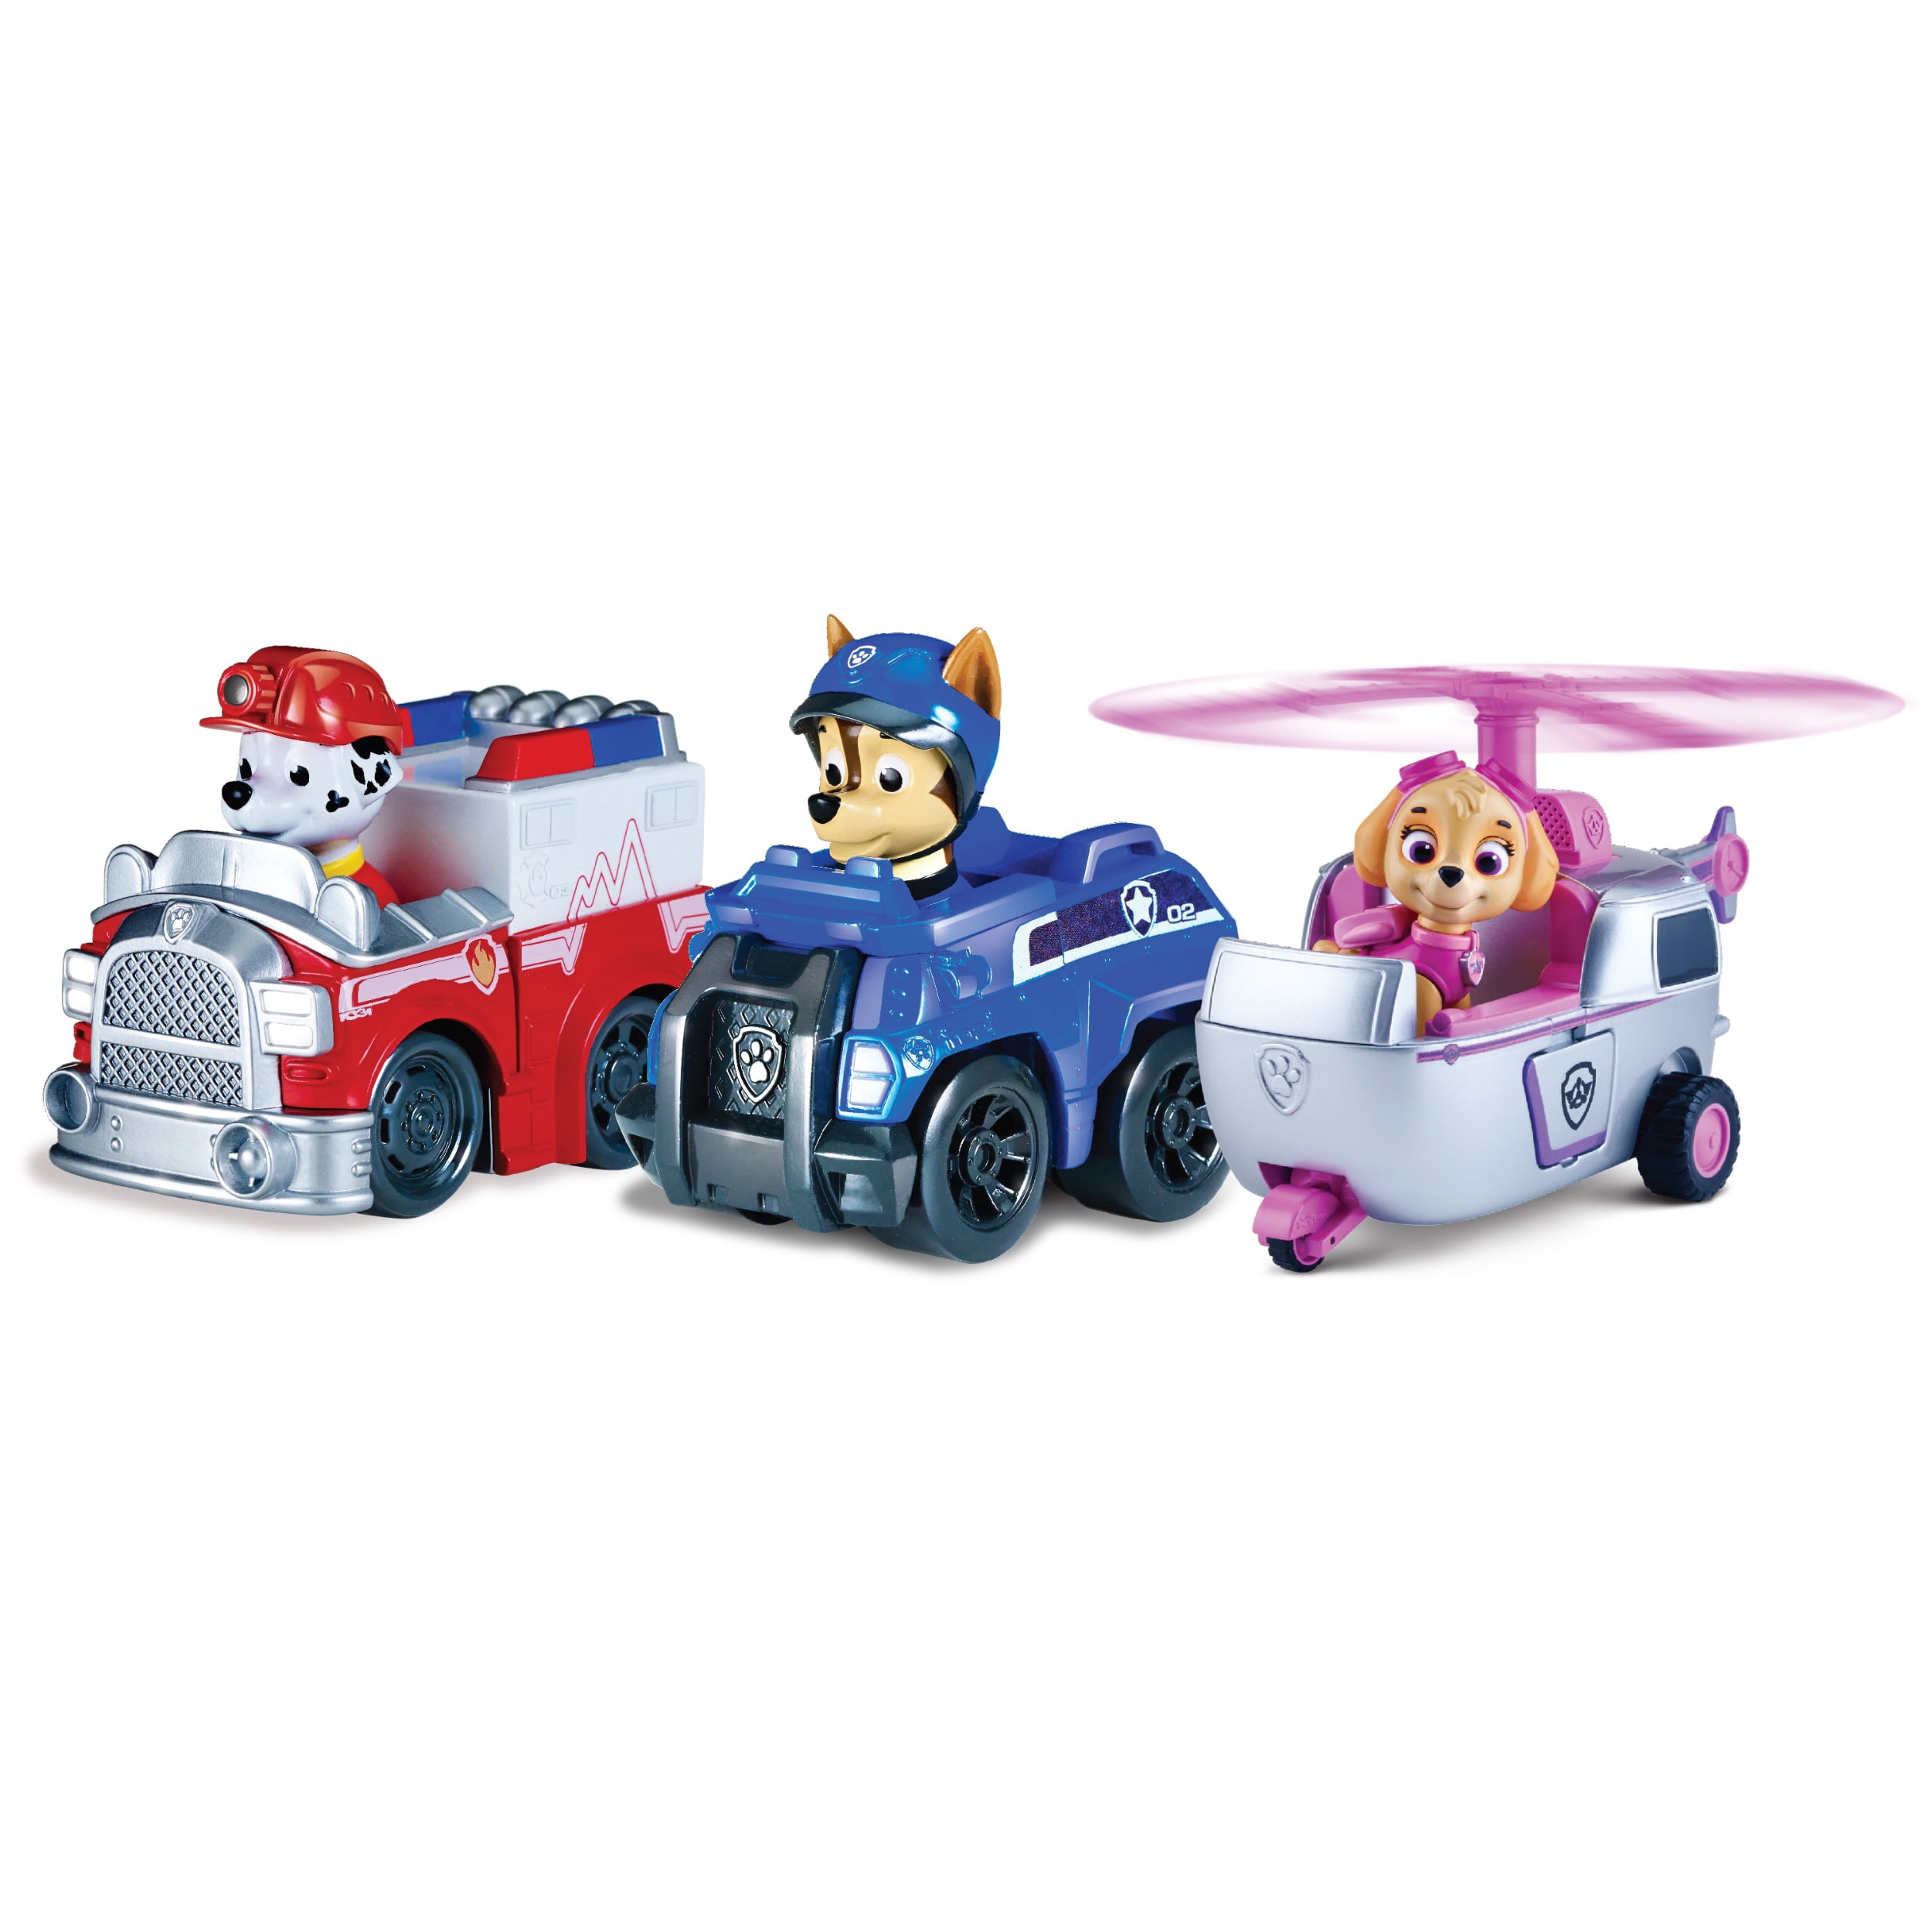 Rocky Rubble Chase Marshall Paw Patrol in Vehicles Figurine Ornament Set of 4 